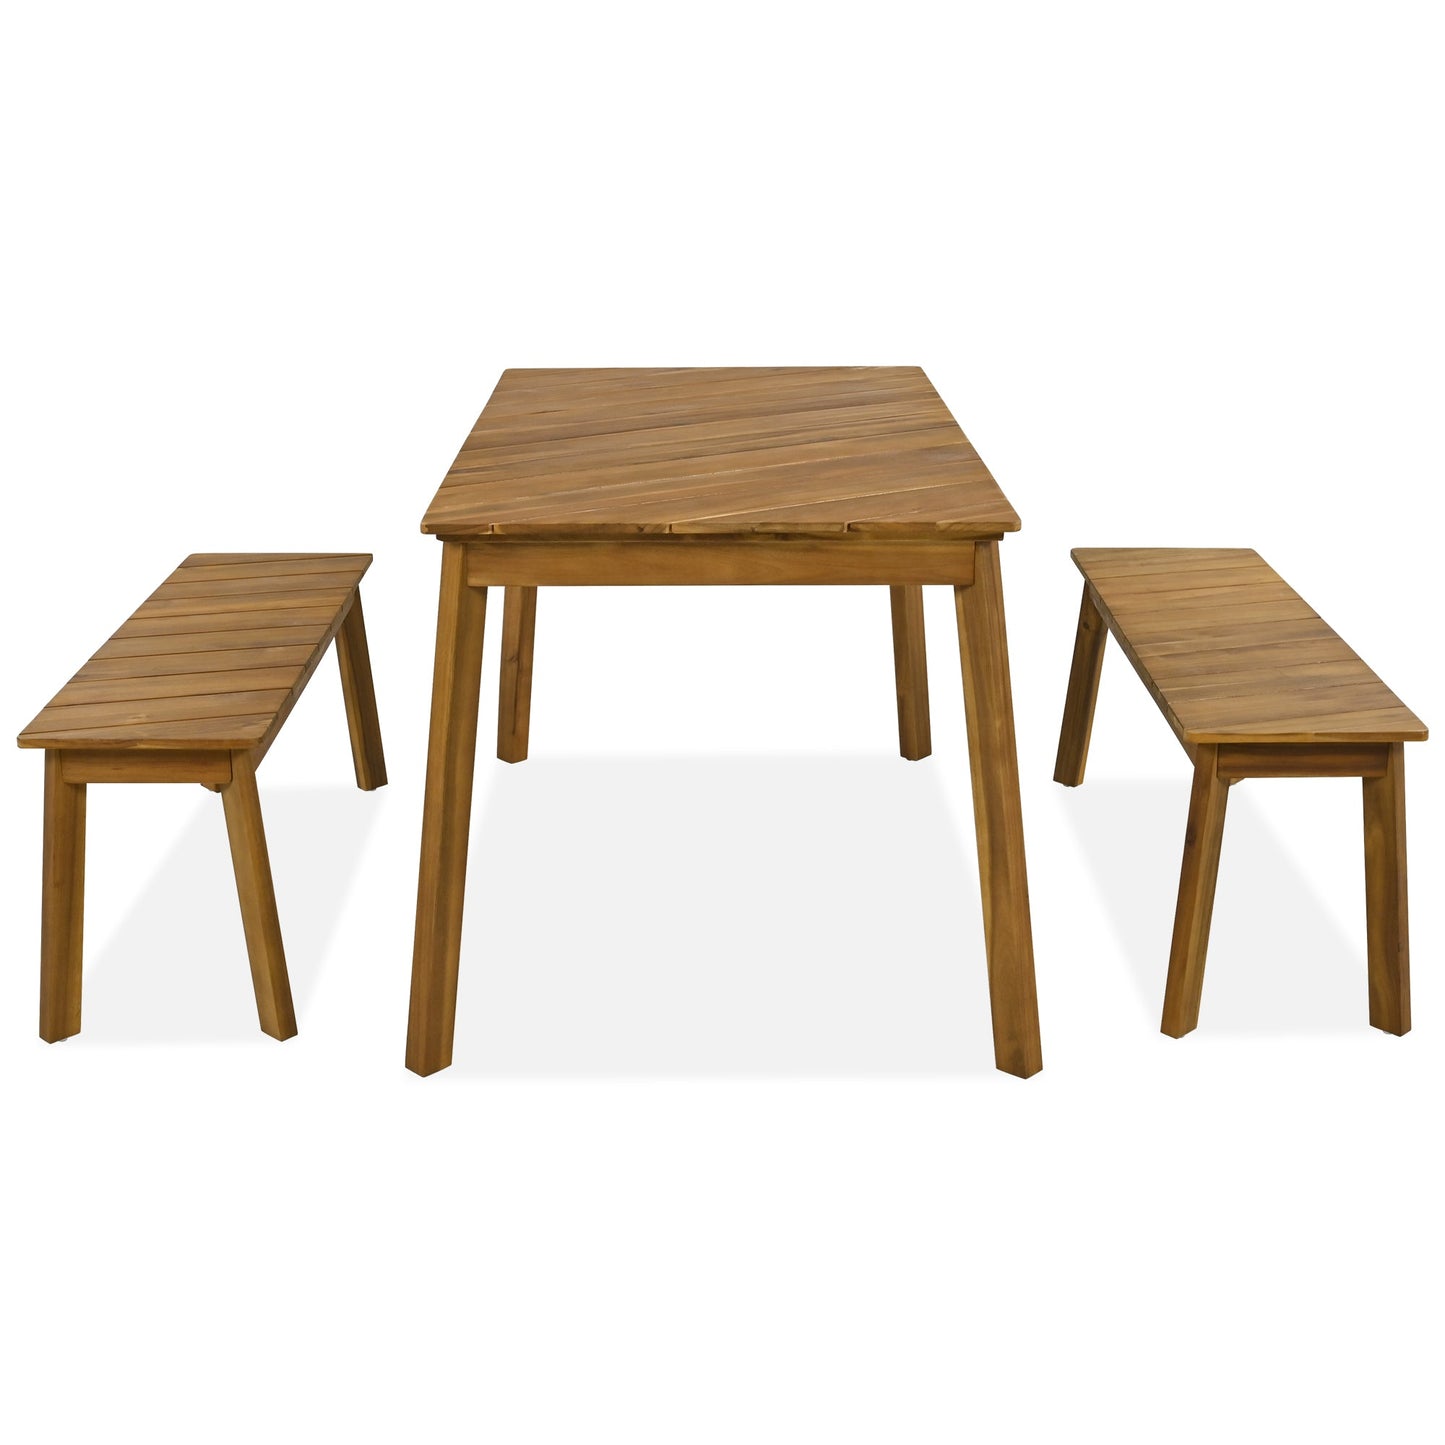 3 Pieces Acacia Wood Table Bench Dining Set For Outdoor & Indoor